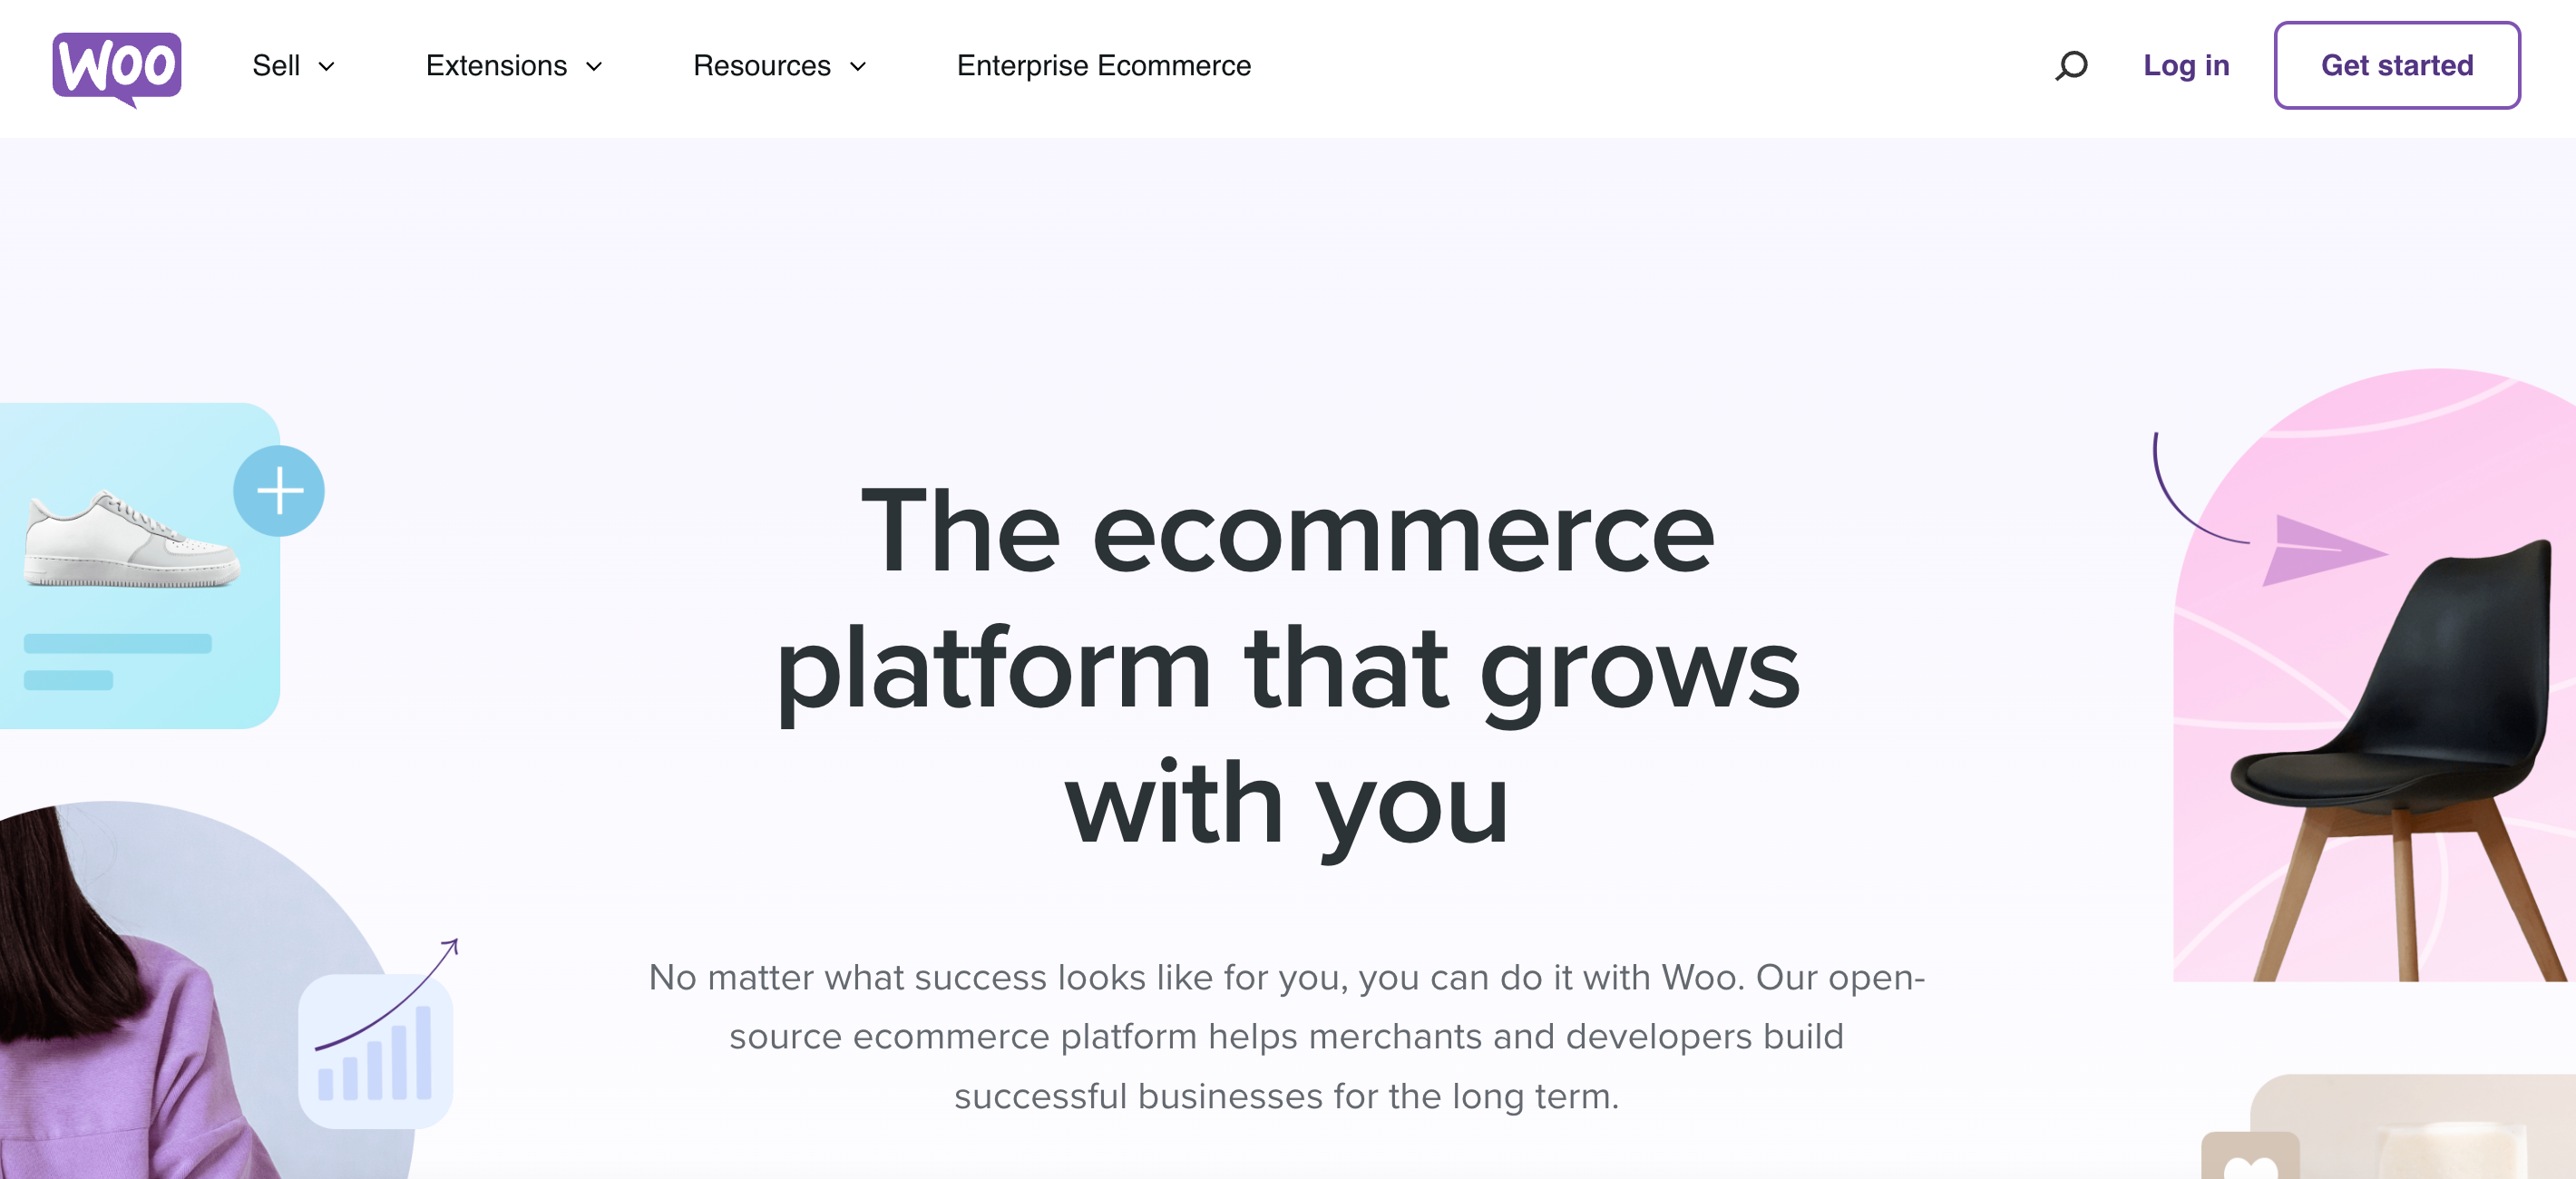 WooCommerce is an amazing eCommerce plugin for your WordPress sites.